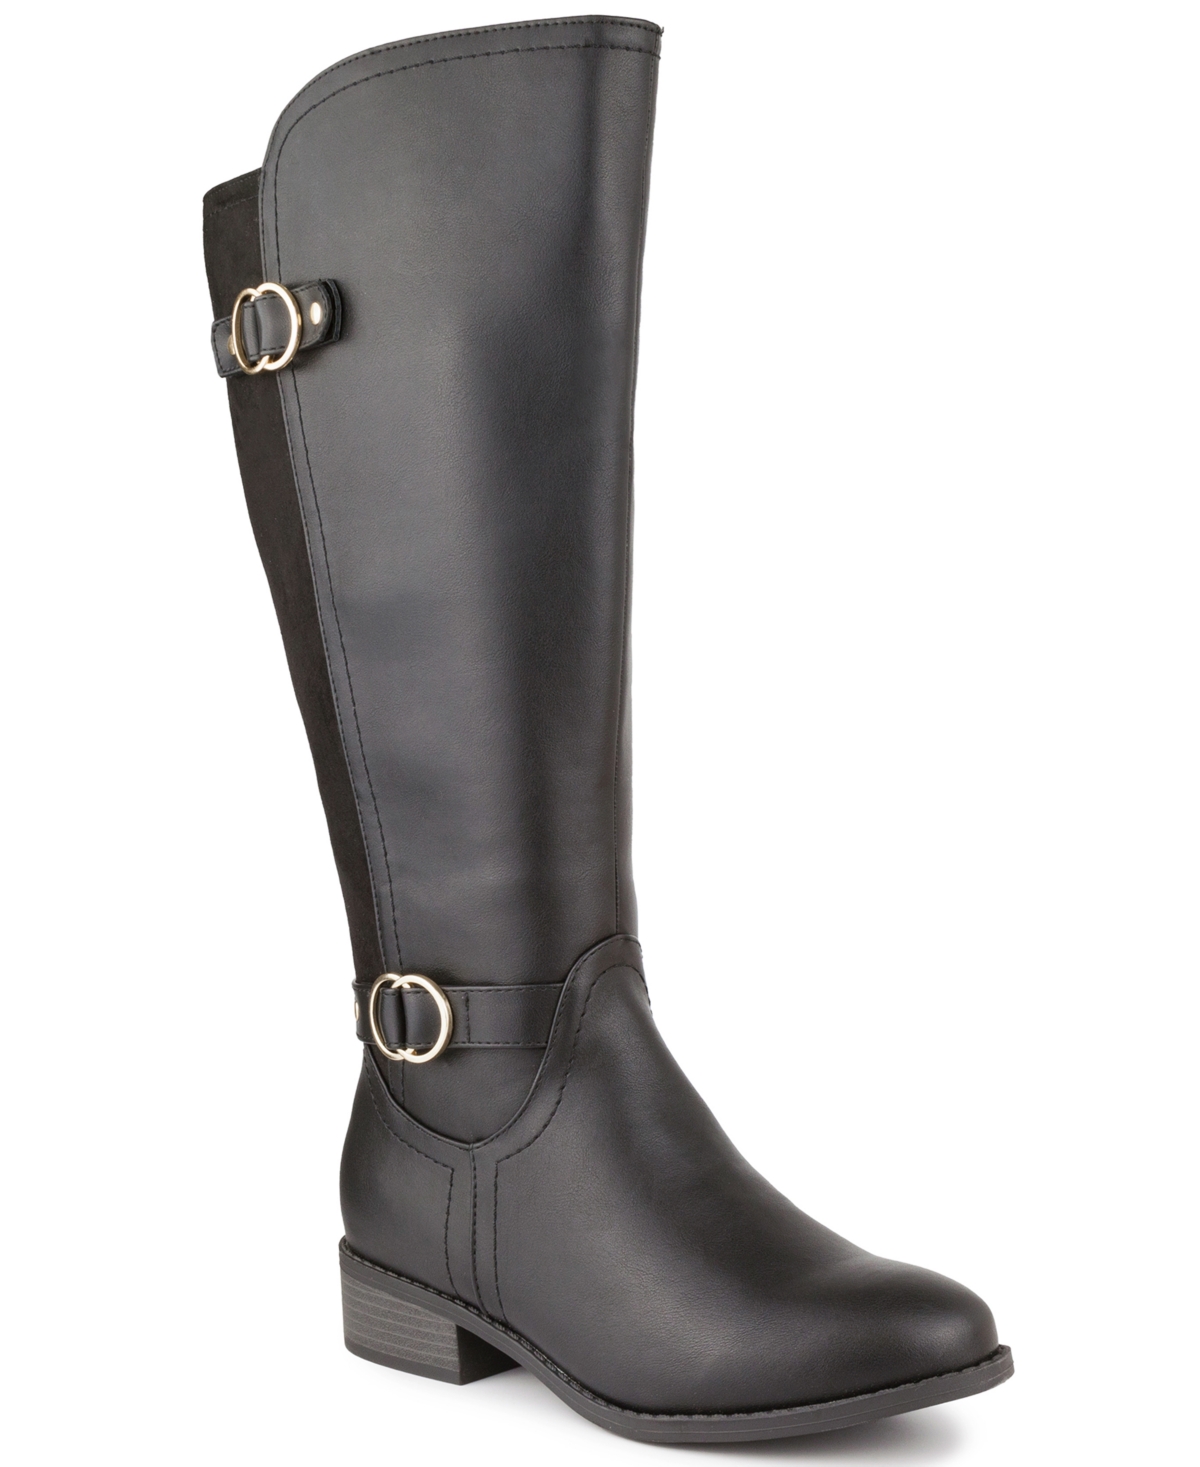 Leandraa Extra Wide-Calf Riding Boots, Created for Macy's - Black